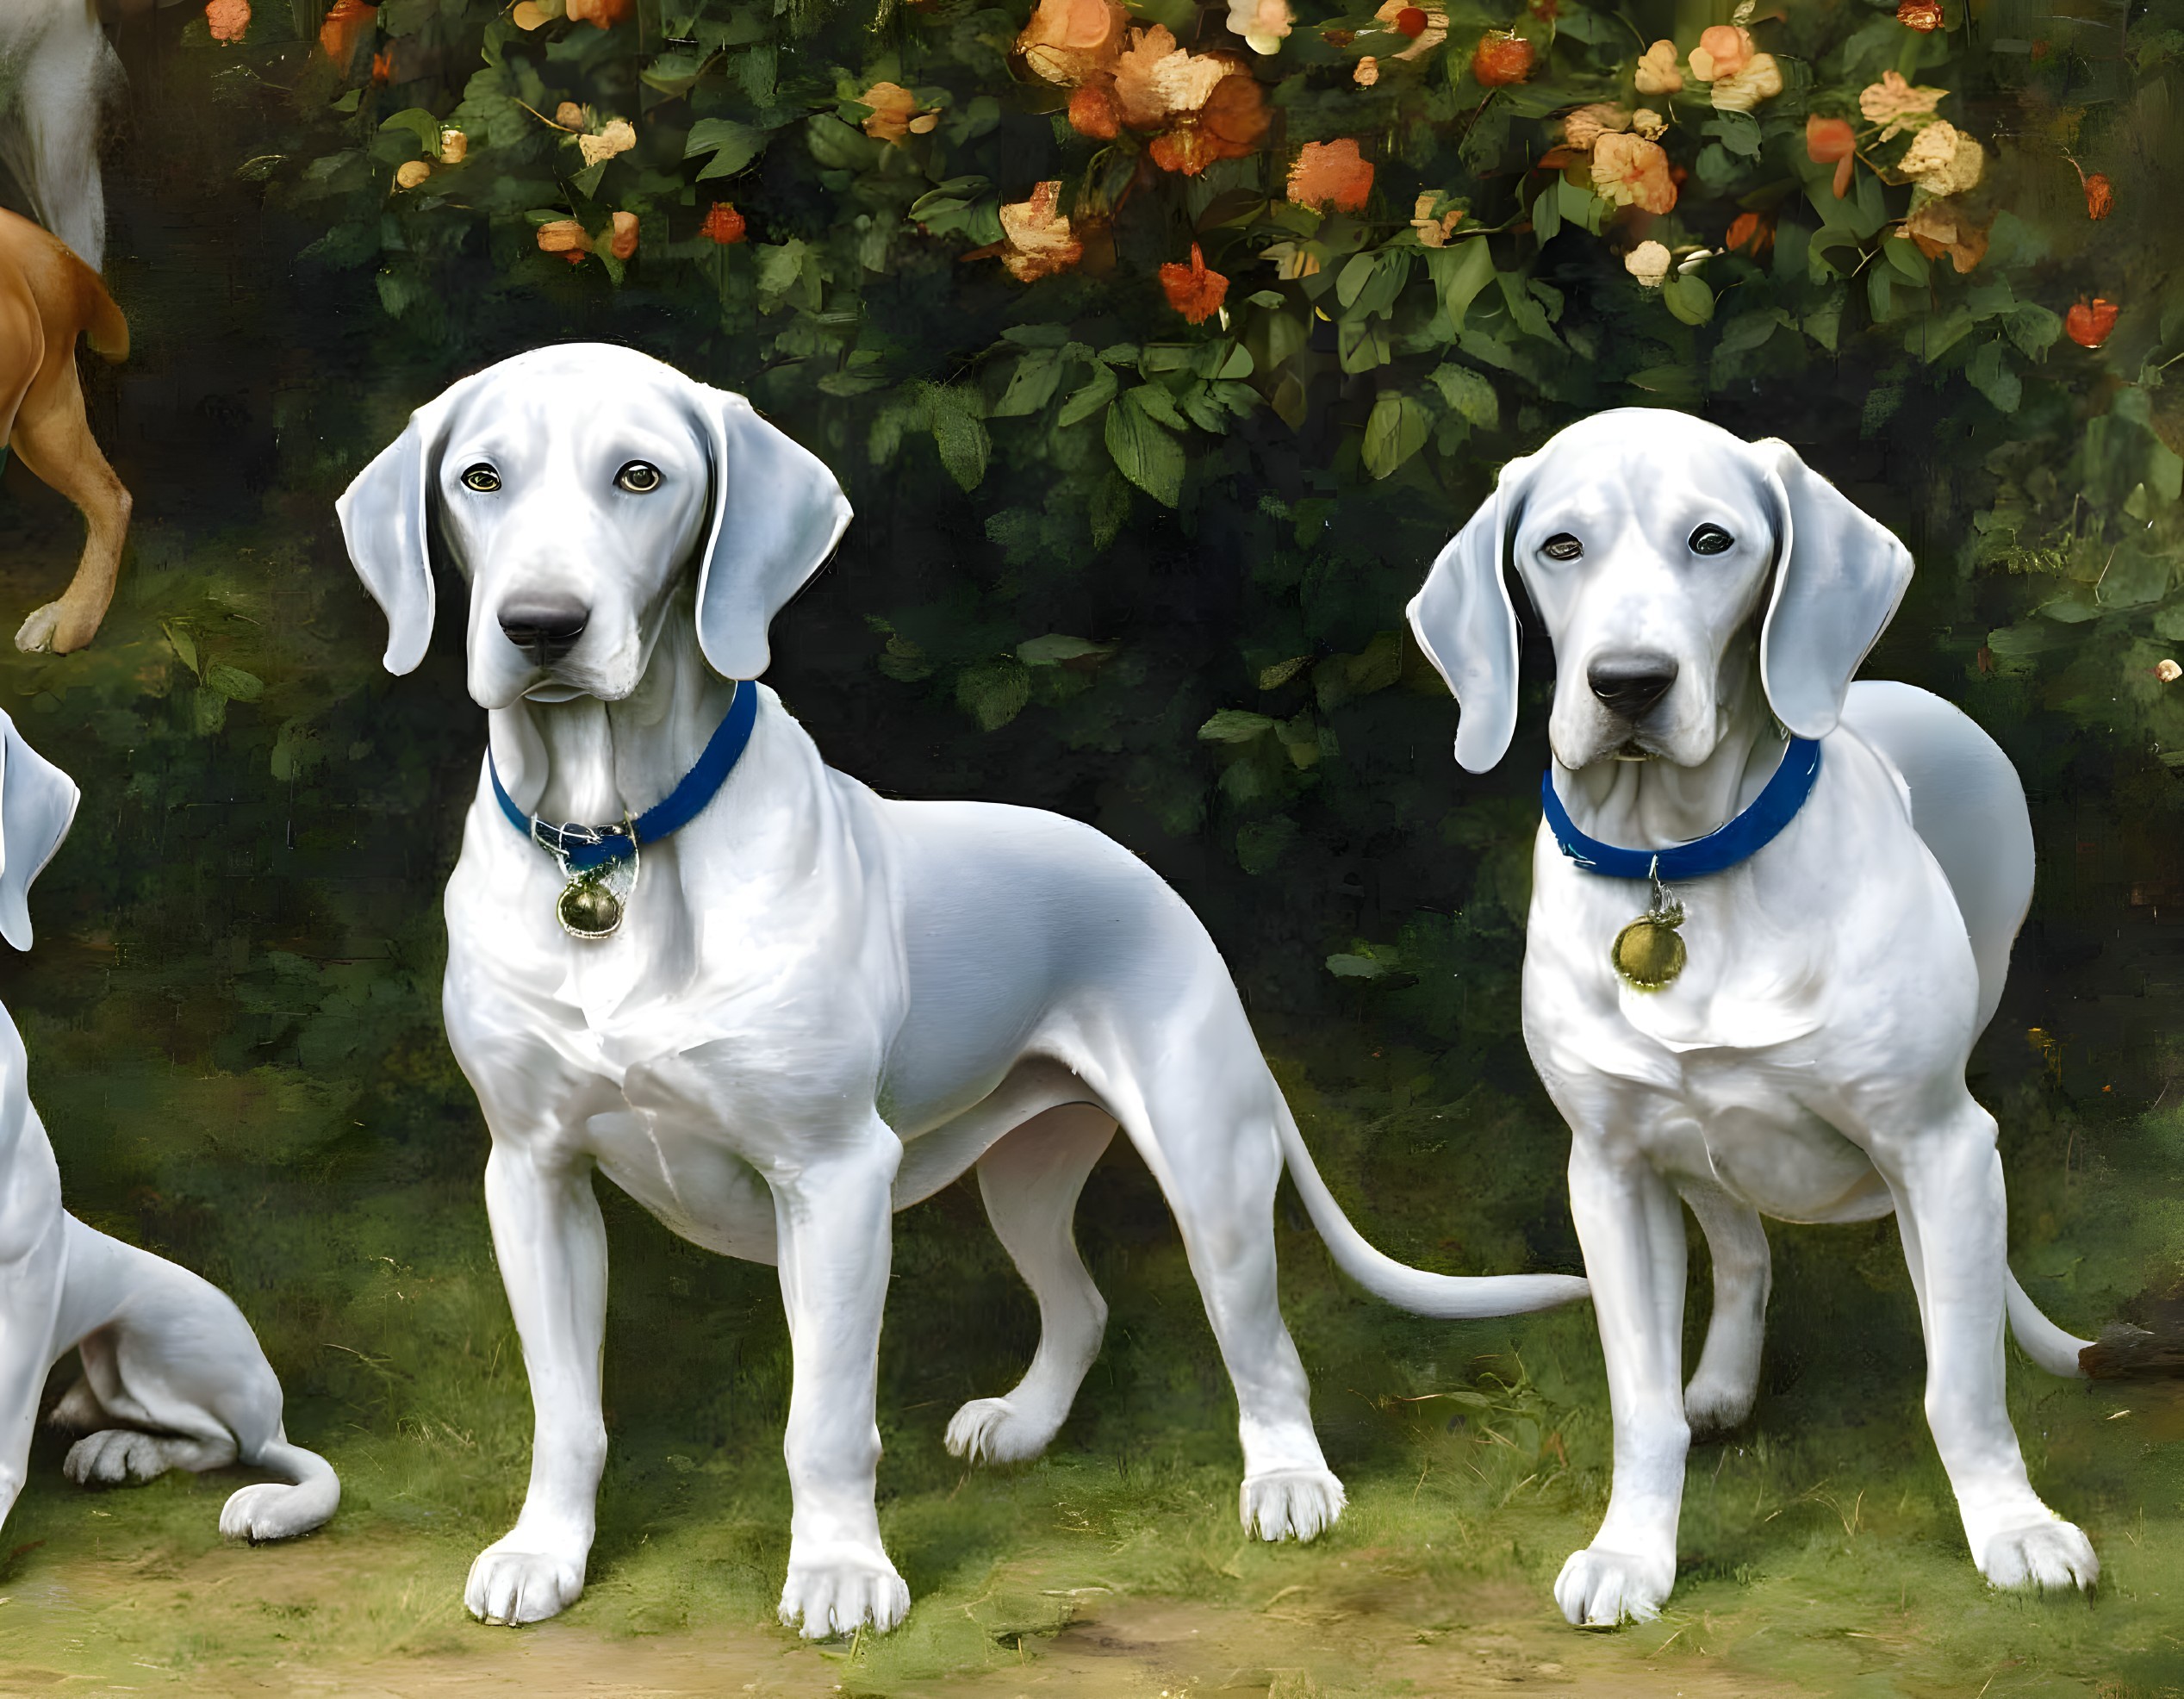 Two White Dogs with Blue Collars and Medals in Front of Orange Flower Bush